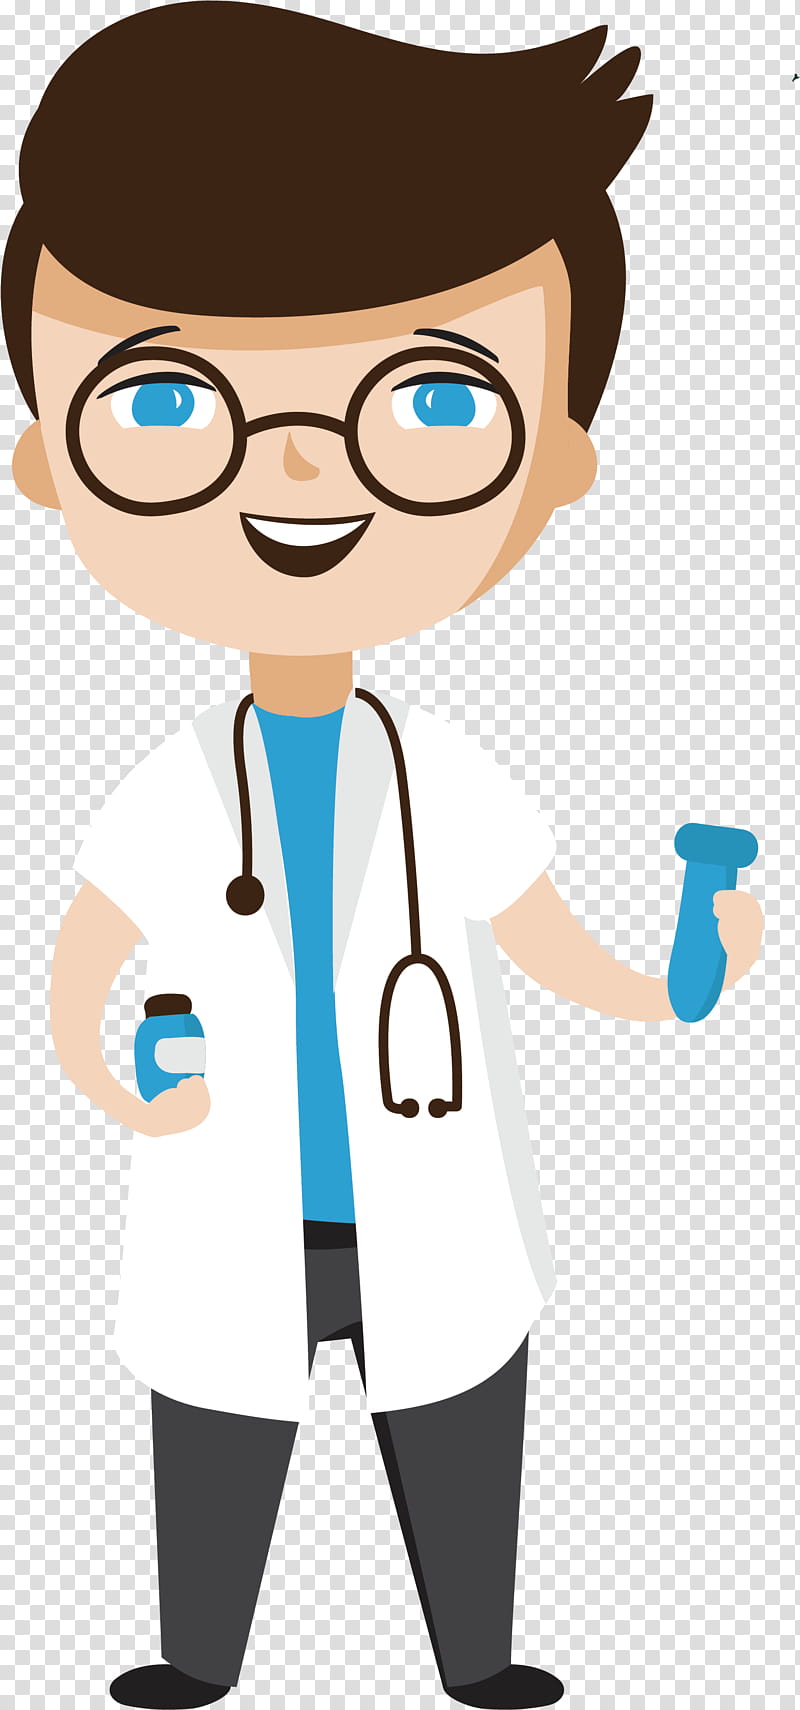 Stethoscope, Physician, Medicine, Cartoon, Primary Care Physician, Drawing, Health Care, Hospital transparent background PNG clipart